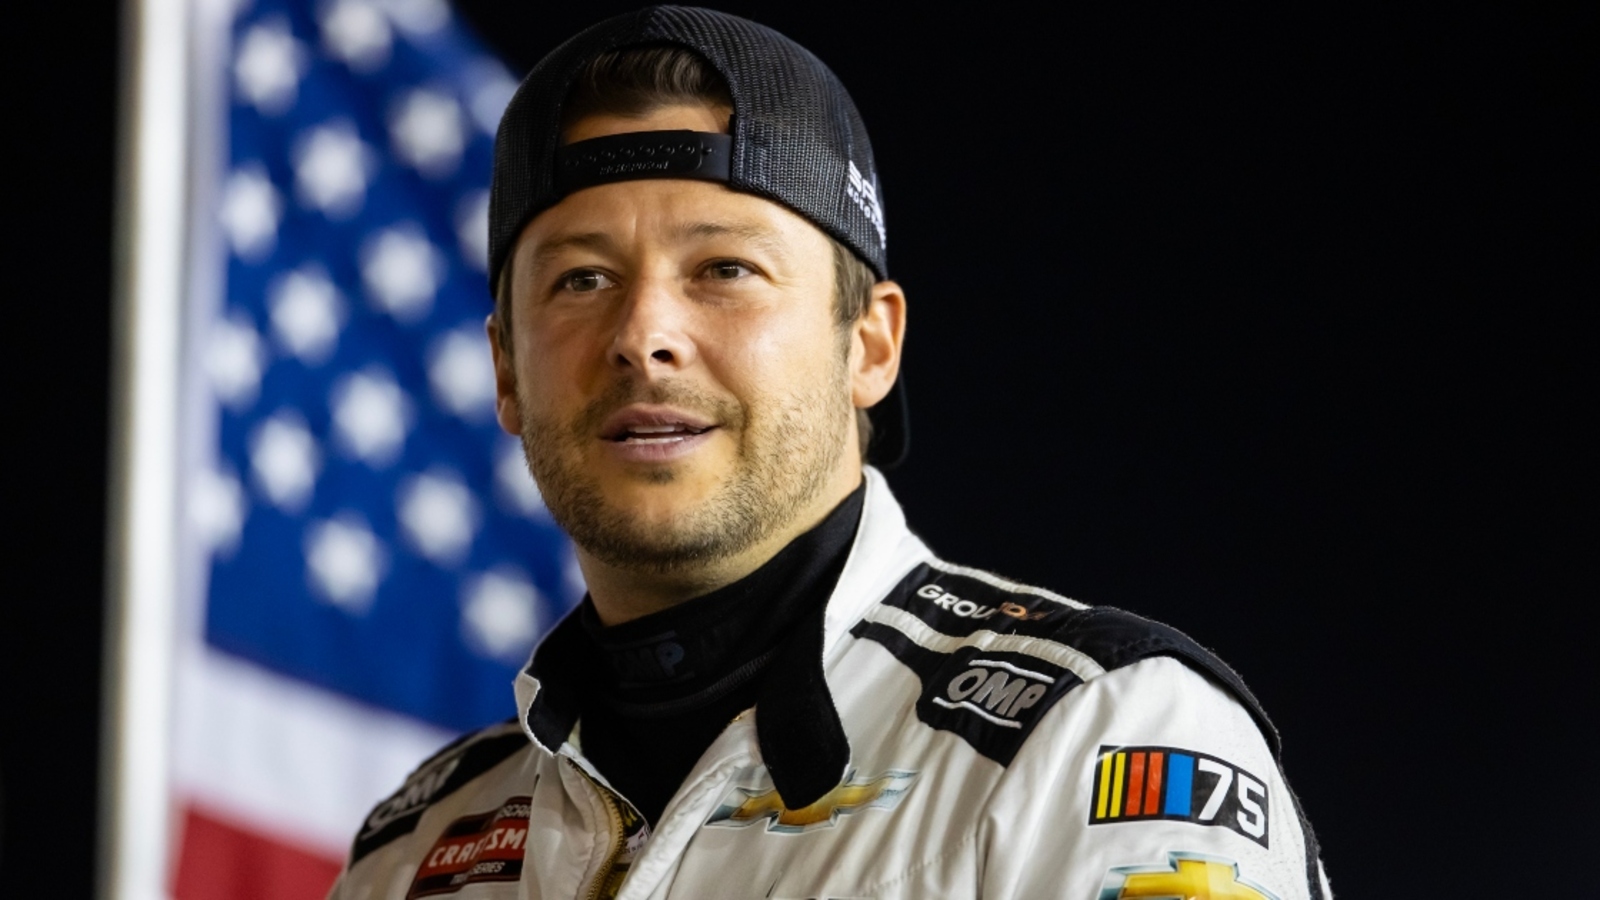 Marco Andretti tops the chart in ARCA Menards Series practice at Daytona